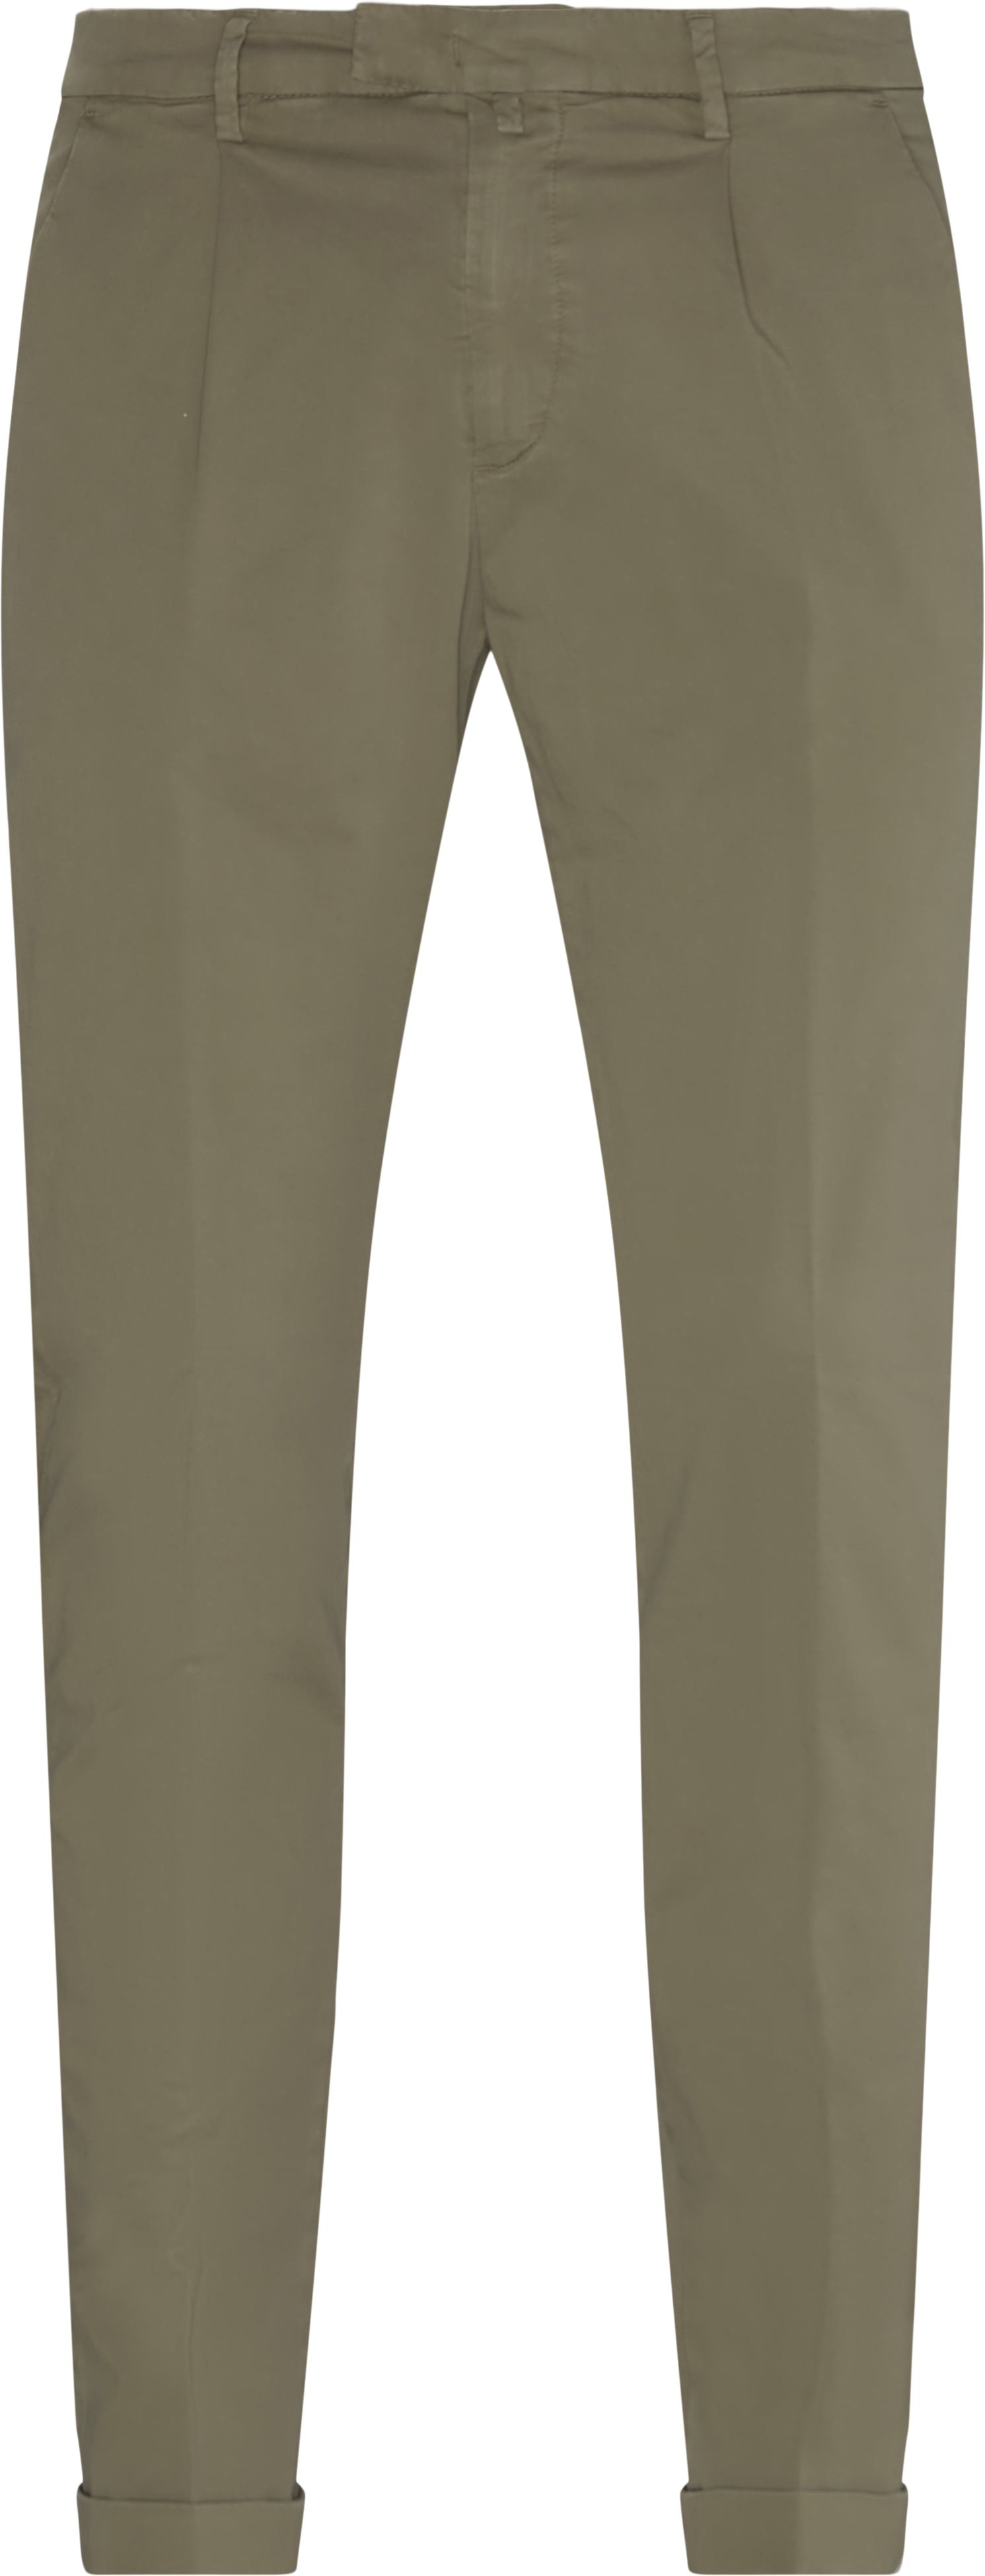 Chinos - Trousers - Slim fit - Army